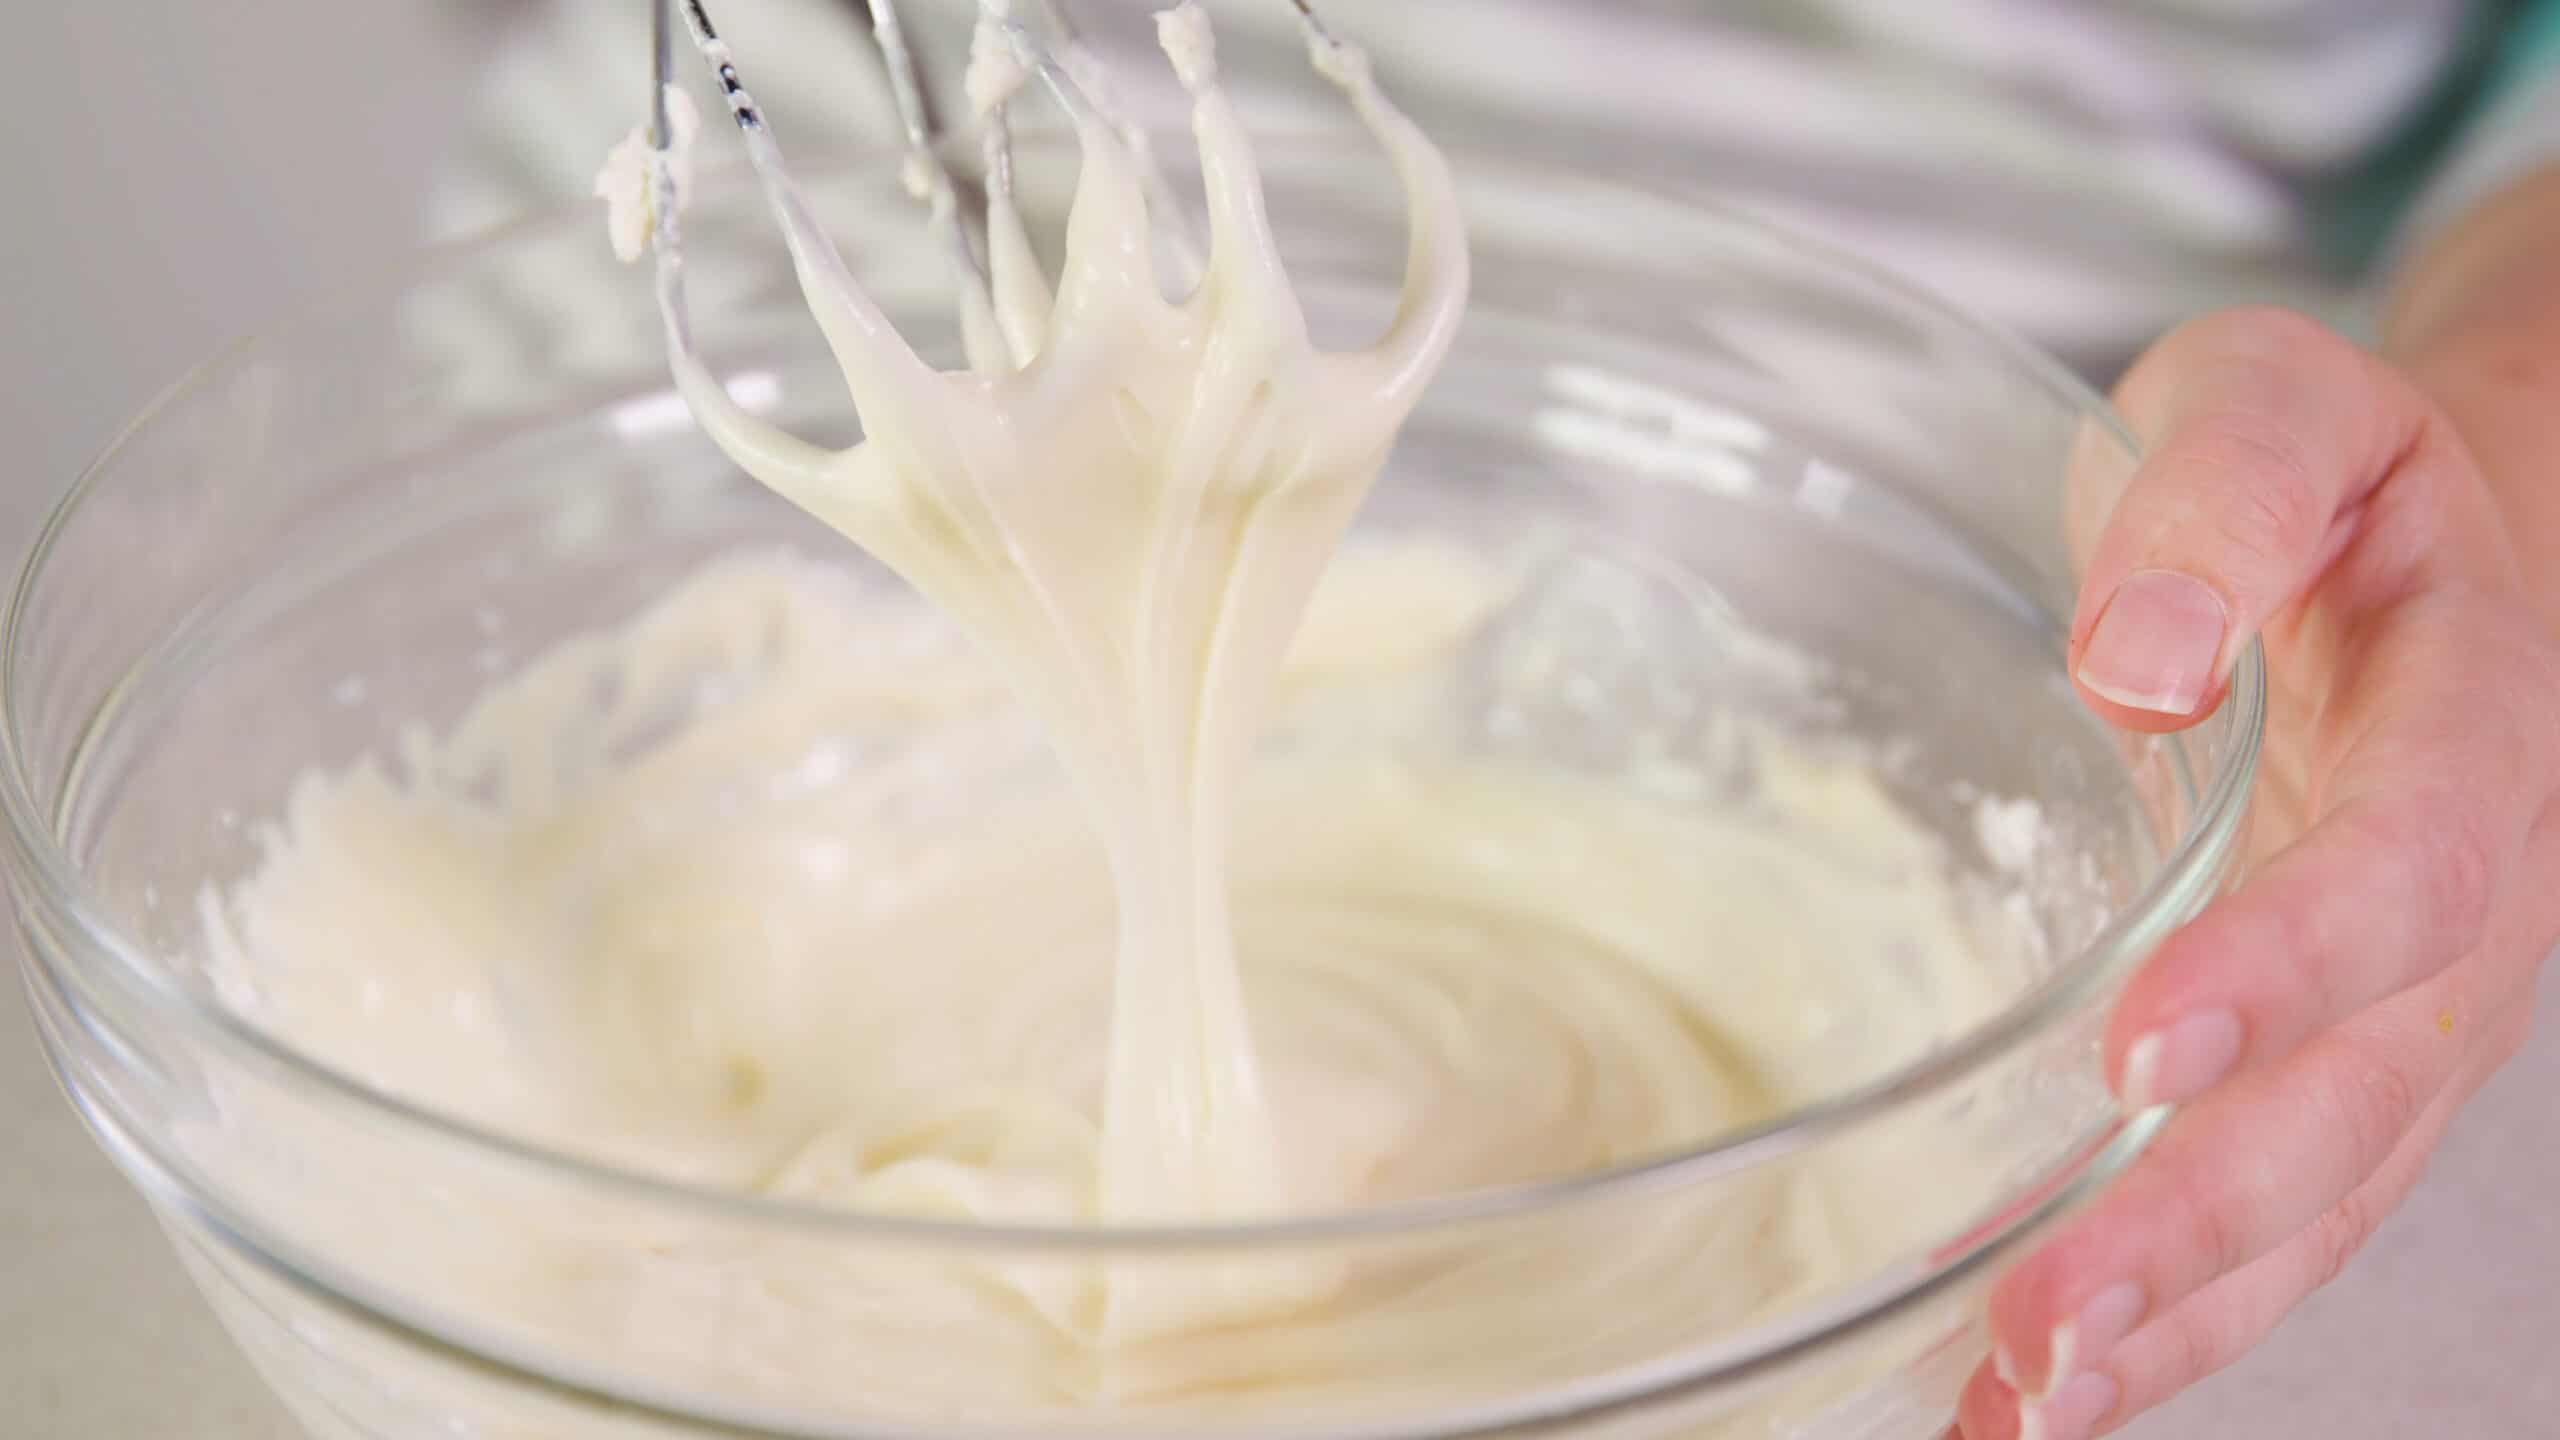 Close-up view of white cream cheese frosting on hand mixer whisks lifted from a large clear mixing bowl setting on a countertop.